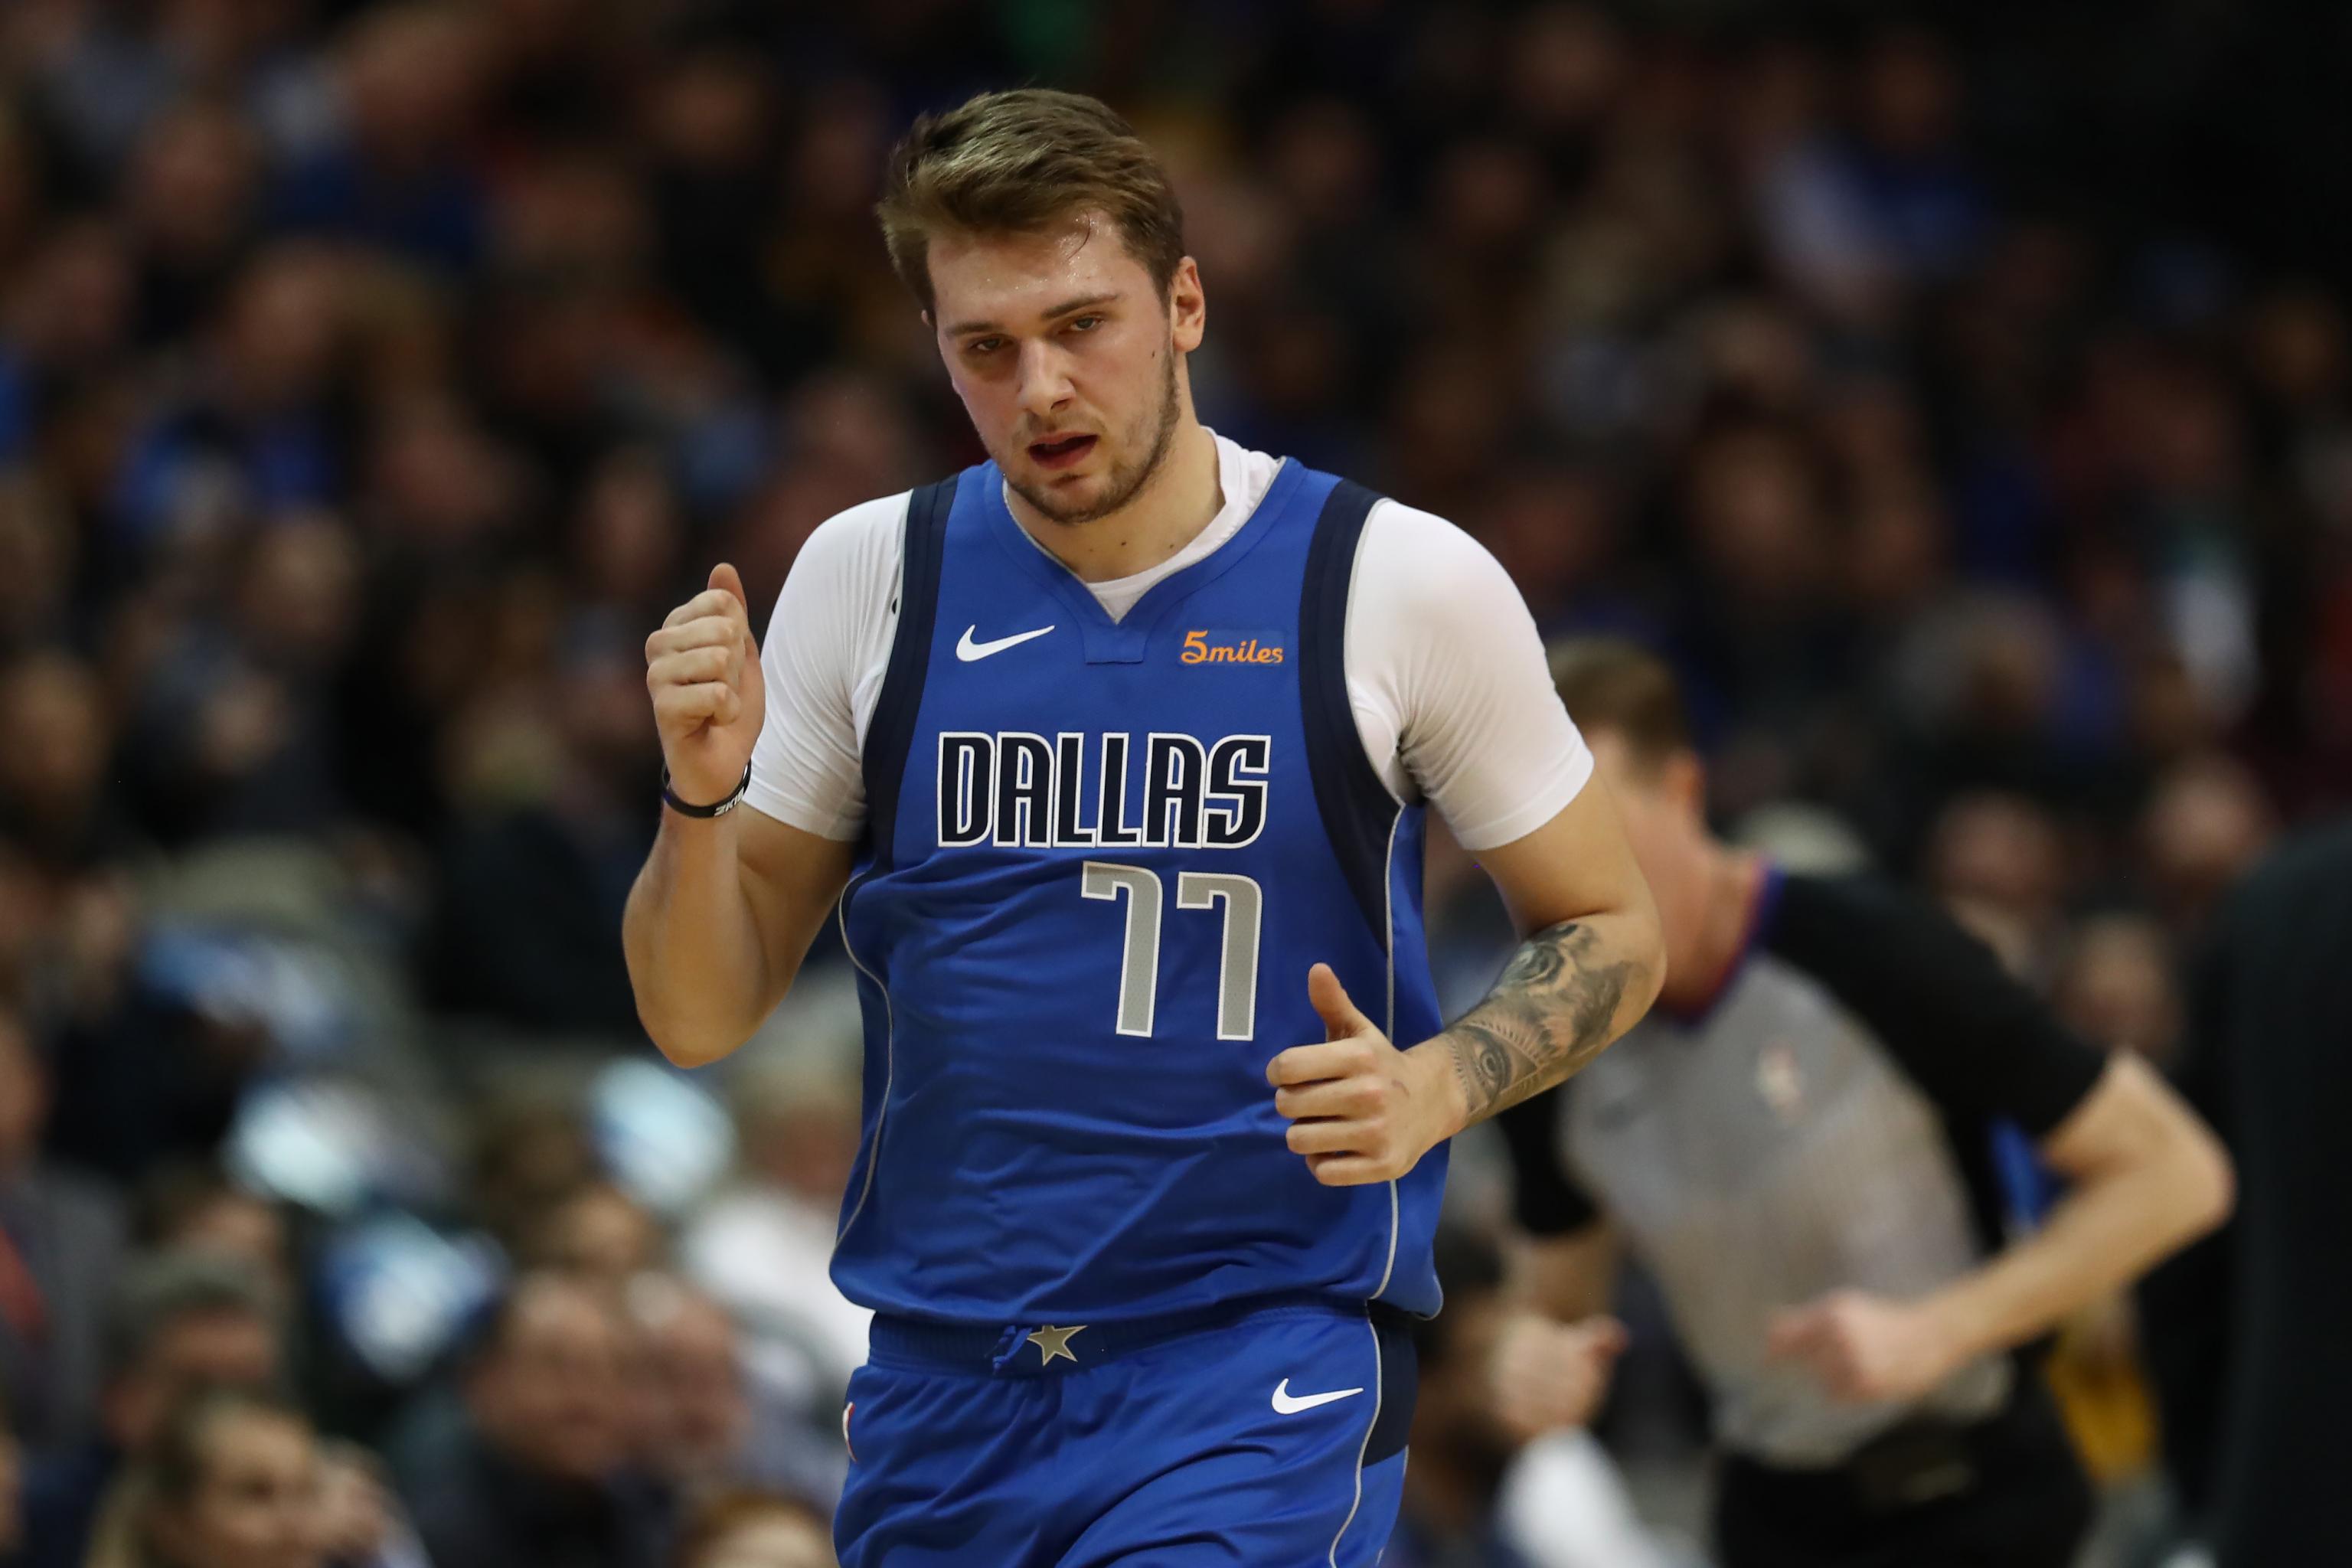 Mavs rookie Luka Doncic gives young fan his jersey after running